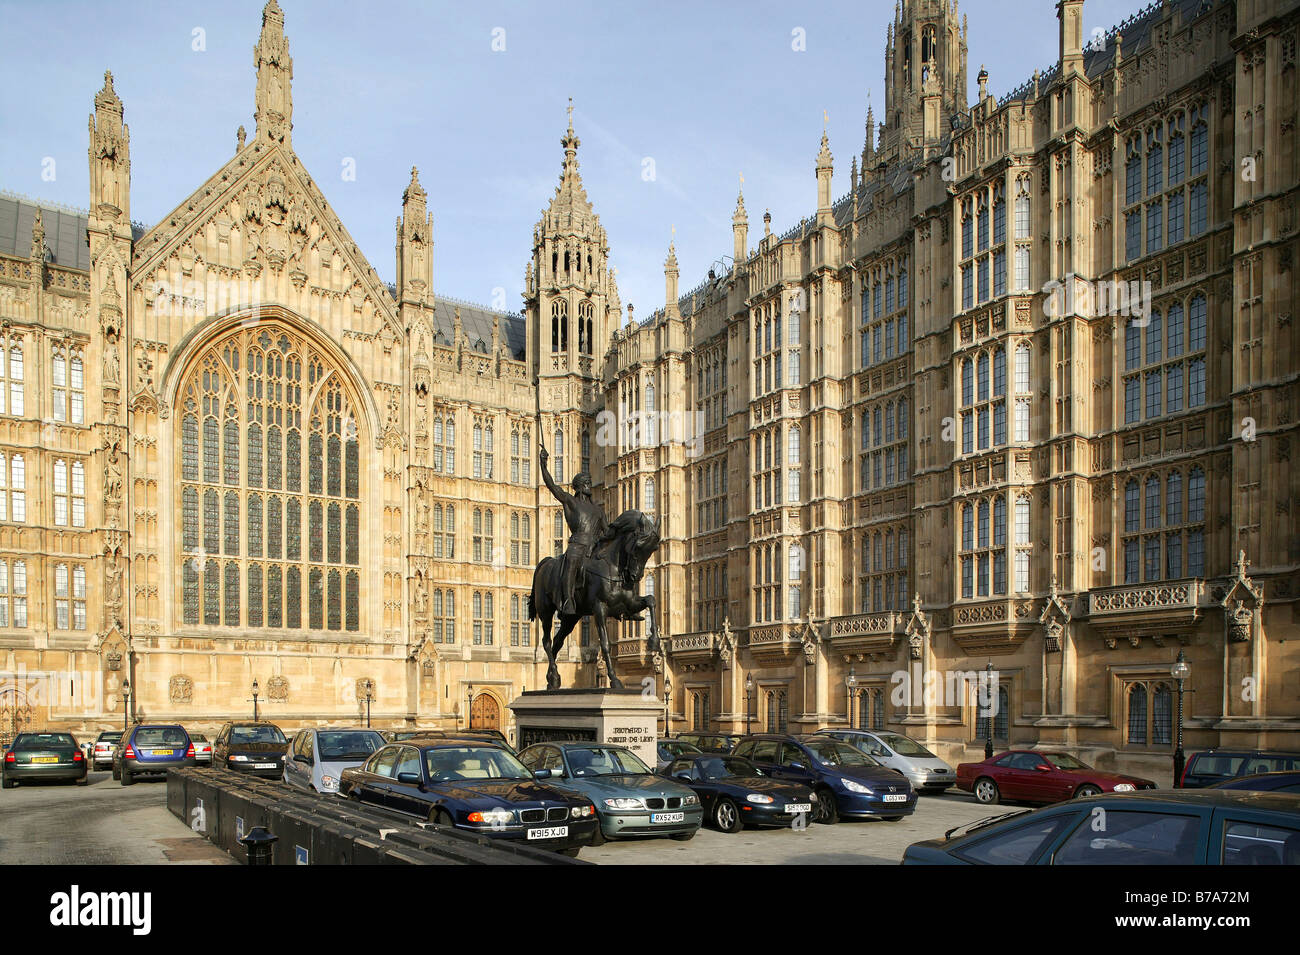 Equestrian statue of Richard I. in front of the Houses of Parliament in London, England, Great Britain, Europe Stock Photo